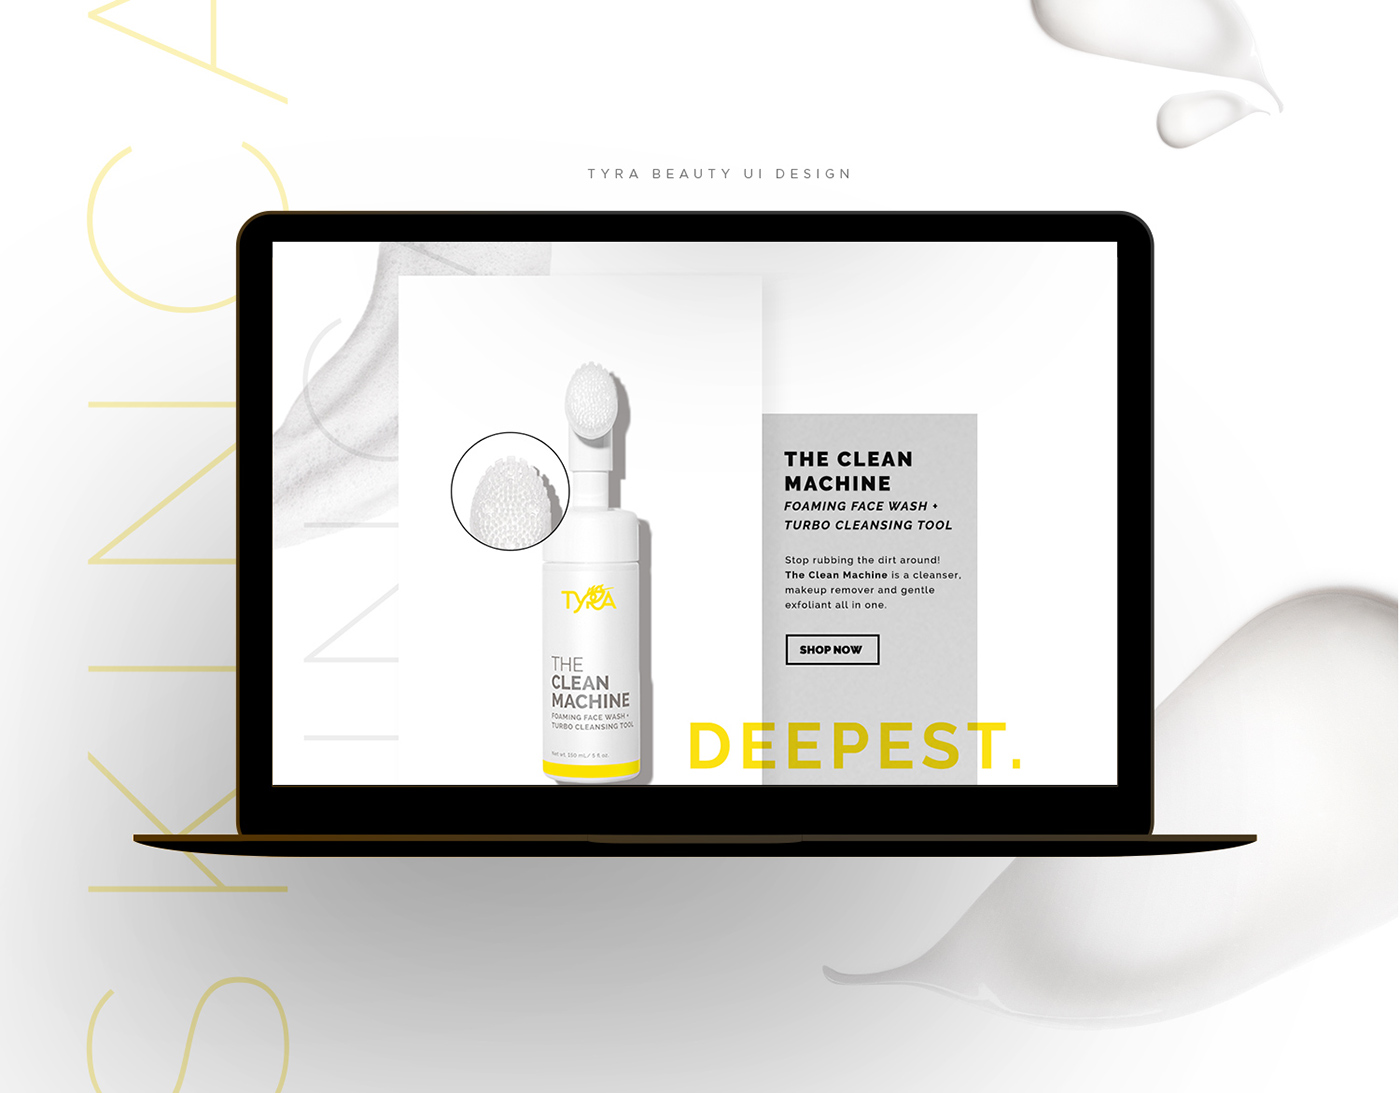 digital campaign beauty Fashion  skincare emails landing page web page UI/UX banners Web Banners